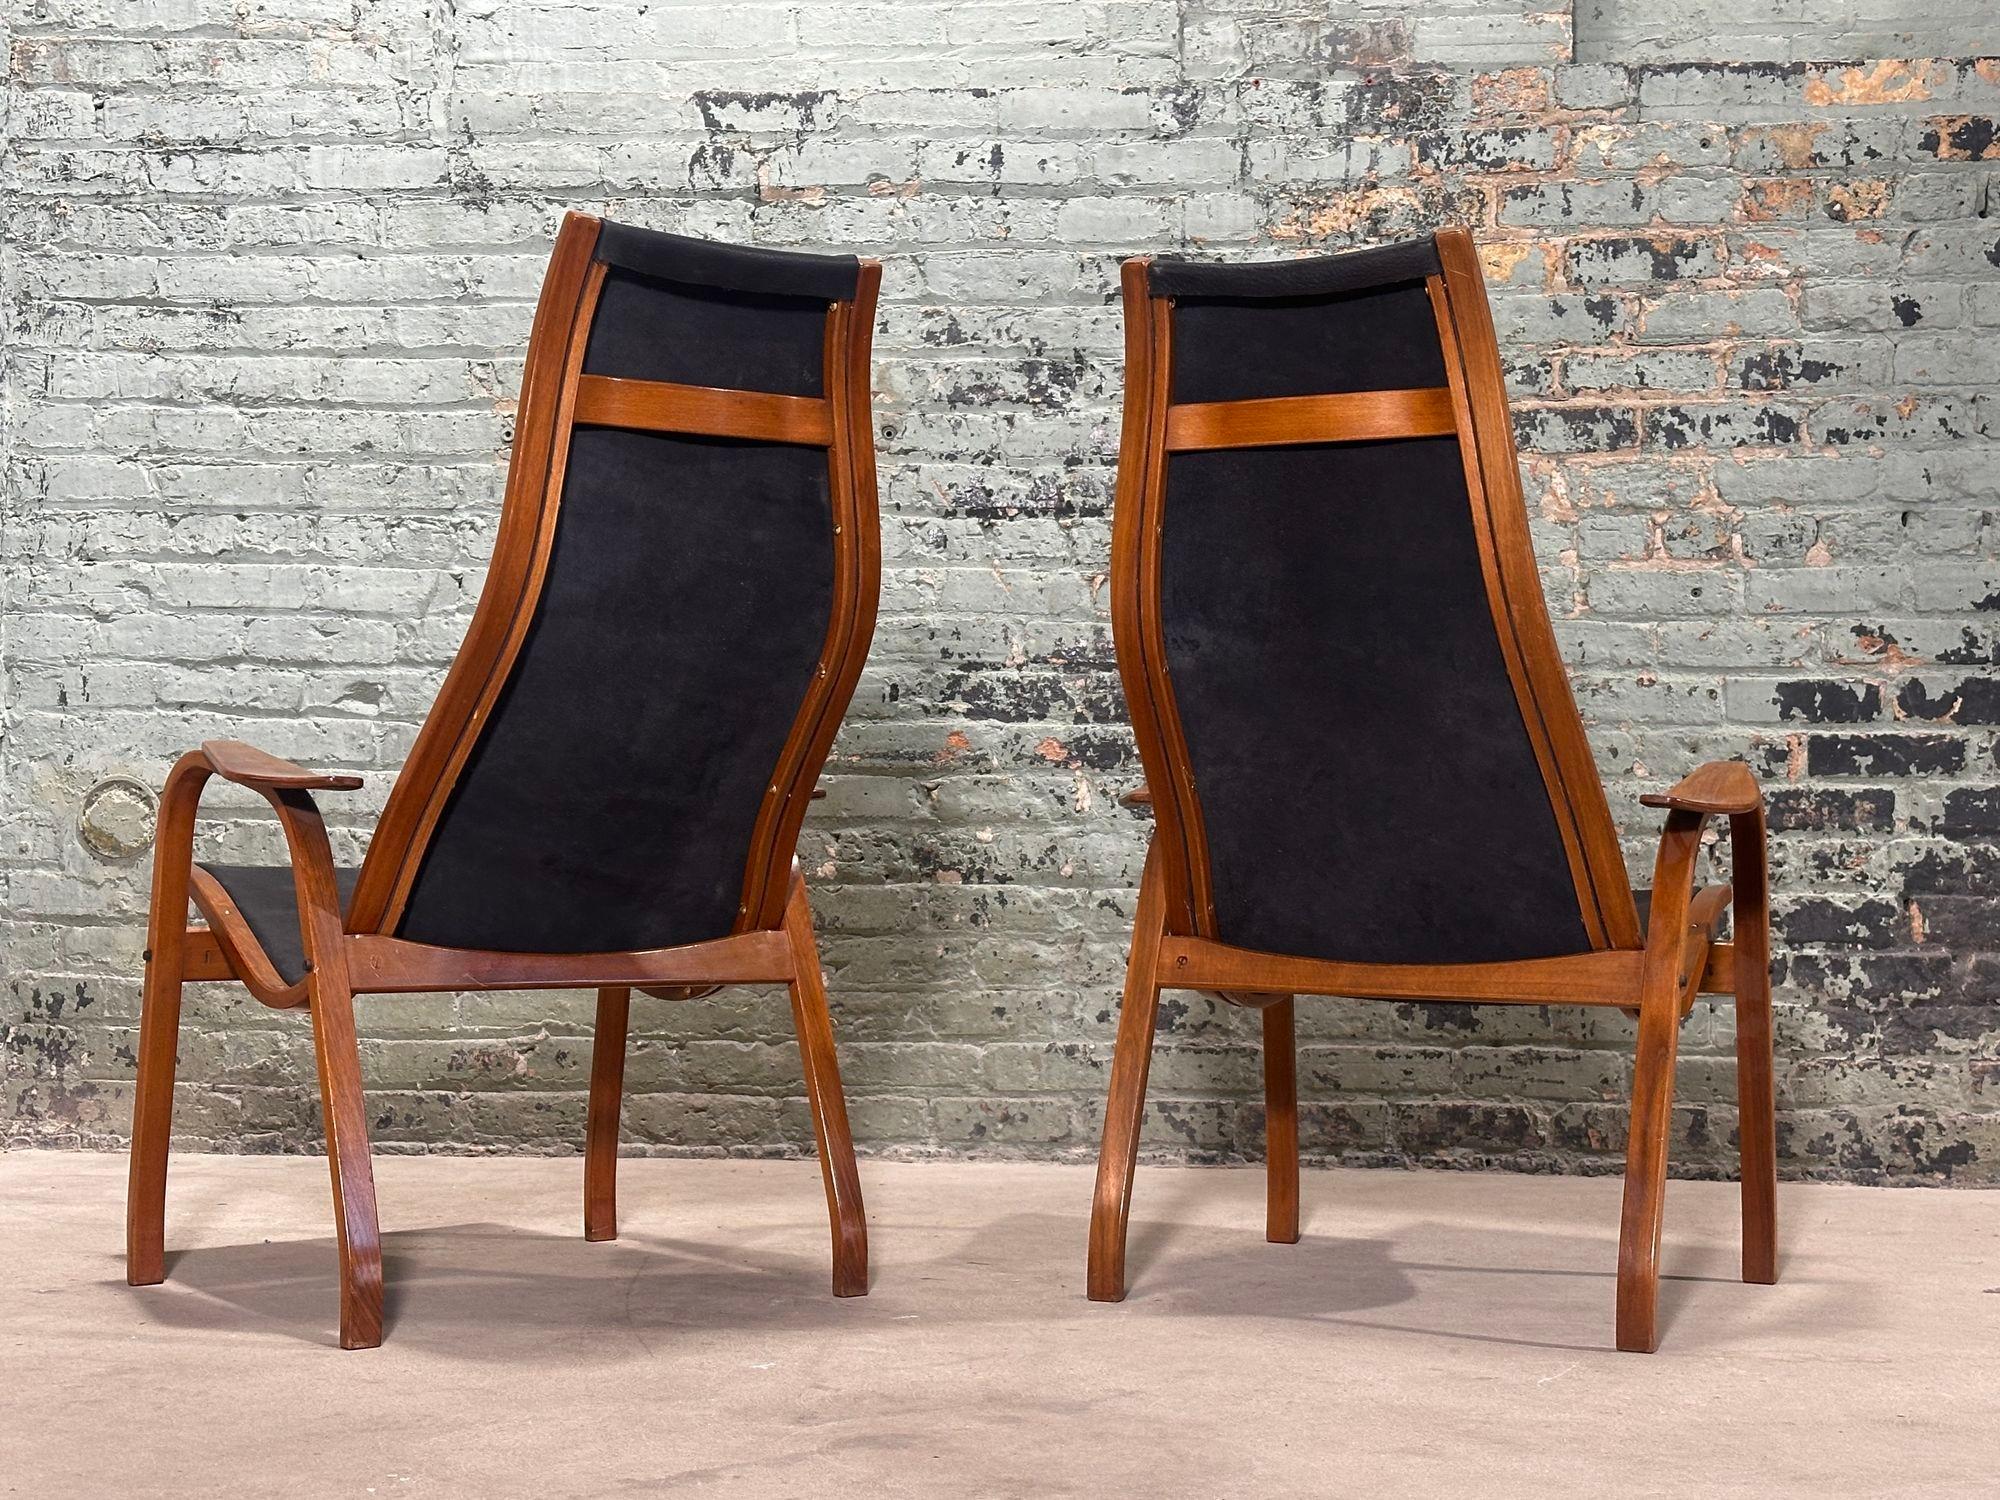 Scandinavian Lamino Leather Lounge Chairs by Yngve Ekstrom for Swedese, 1950 For Sale 2